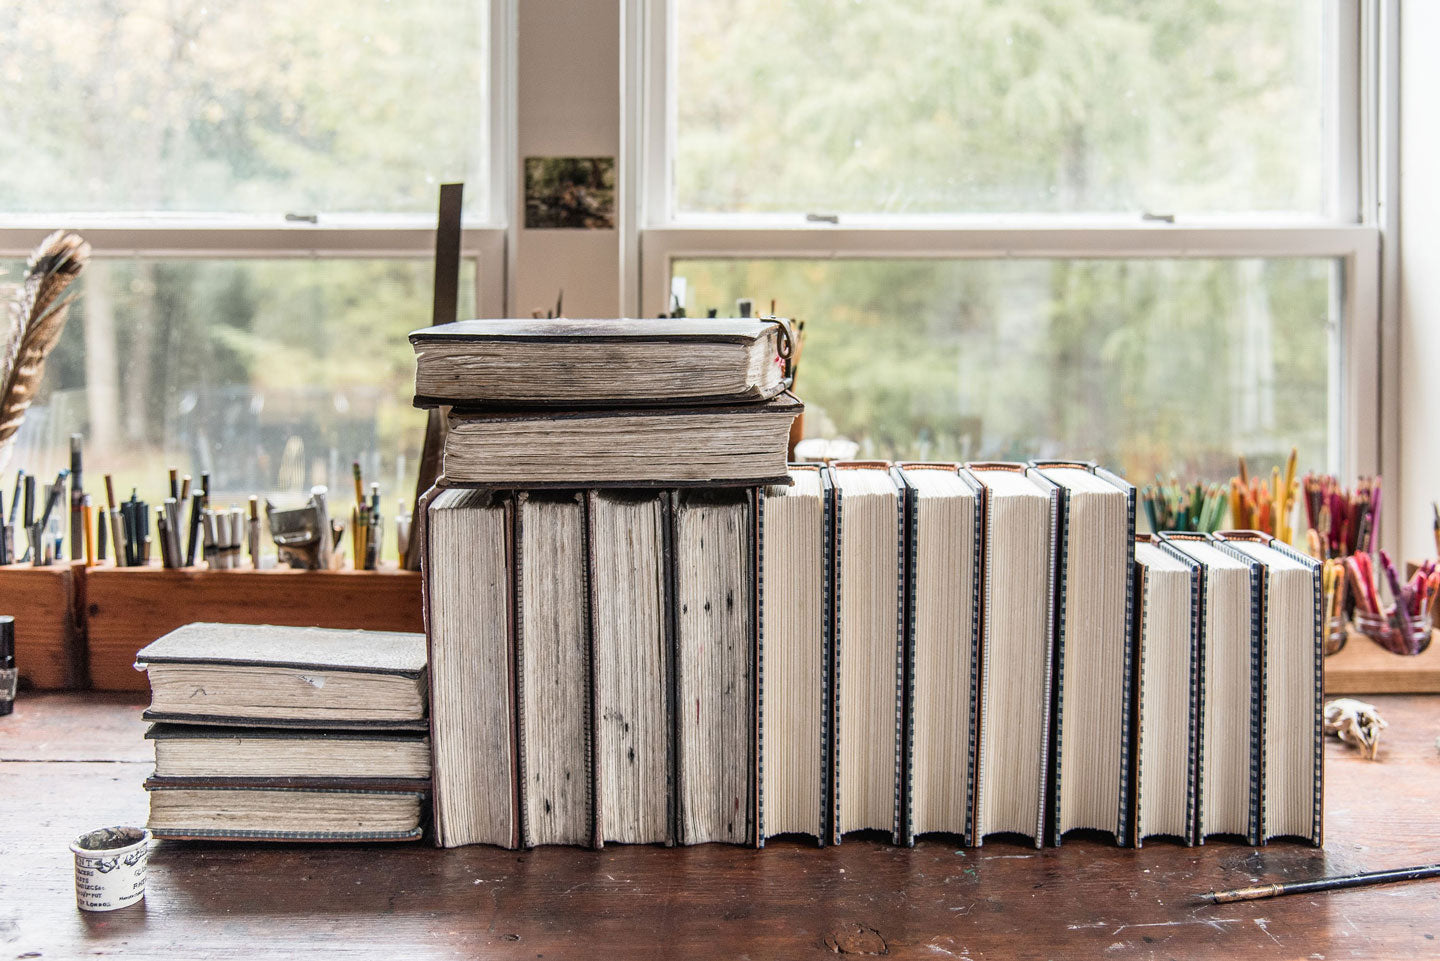 Handbound Leather Journals by Peg and Awl